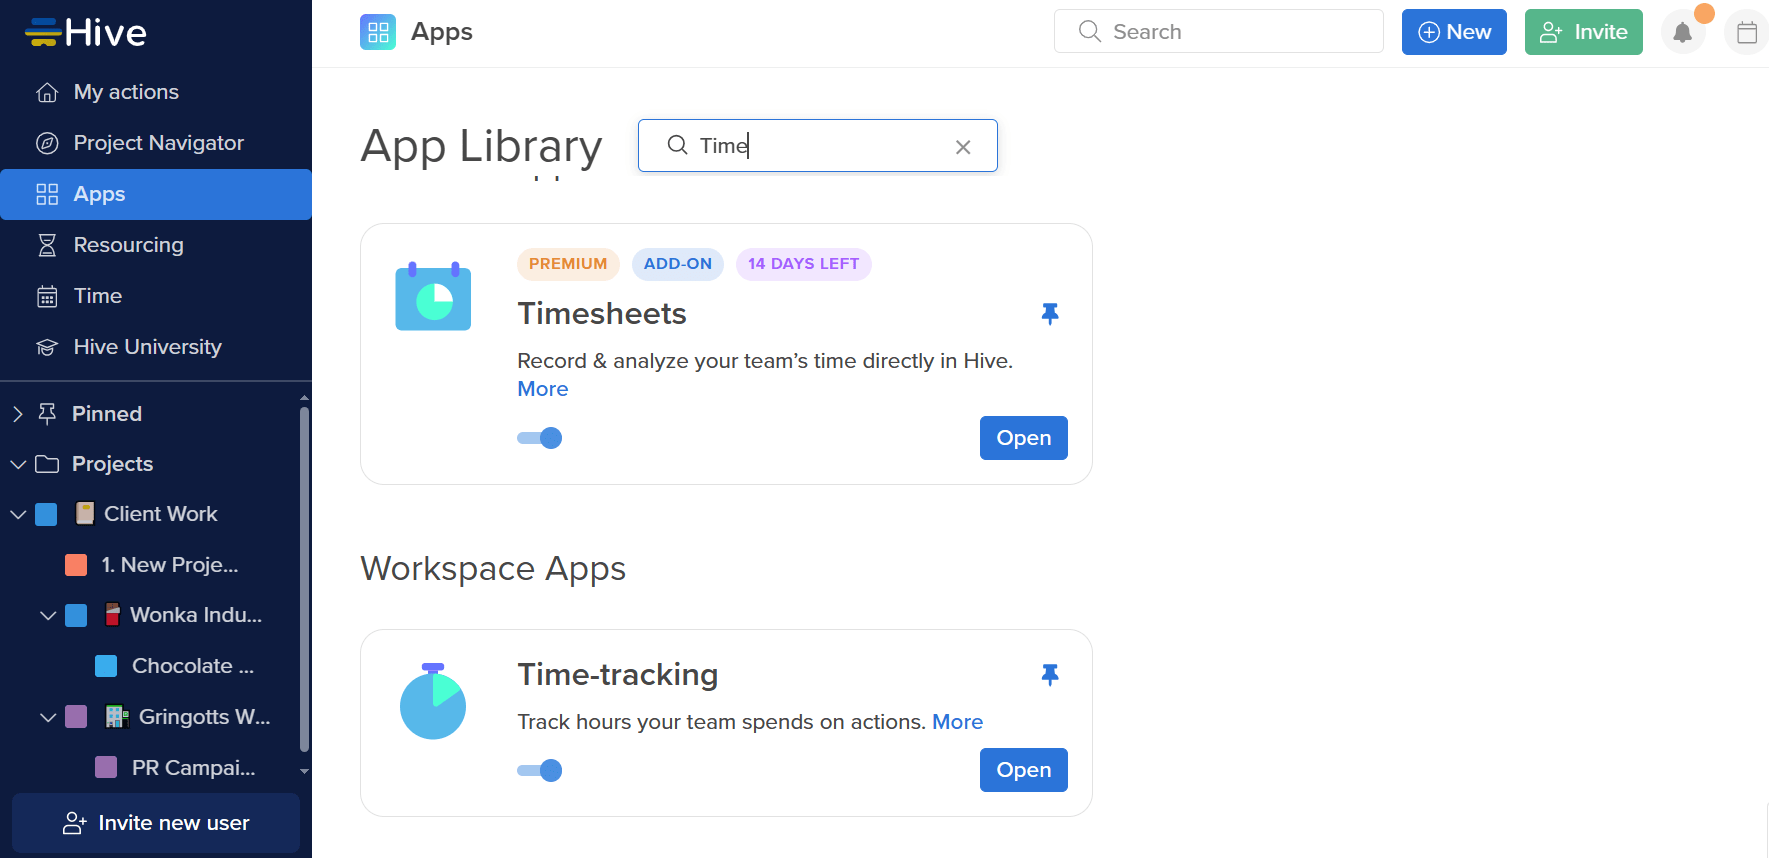 App library in Hive